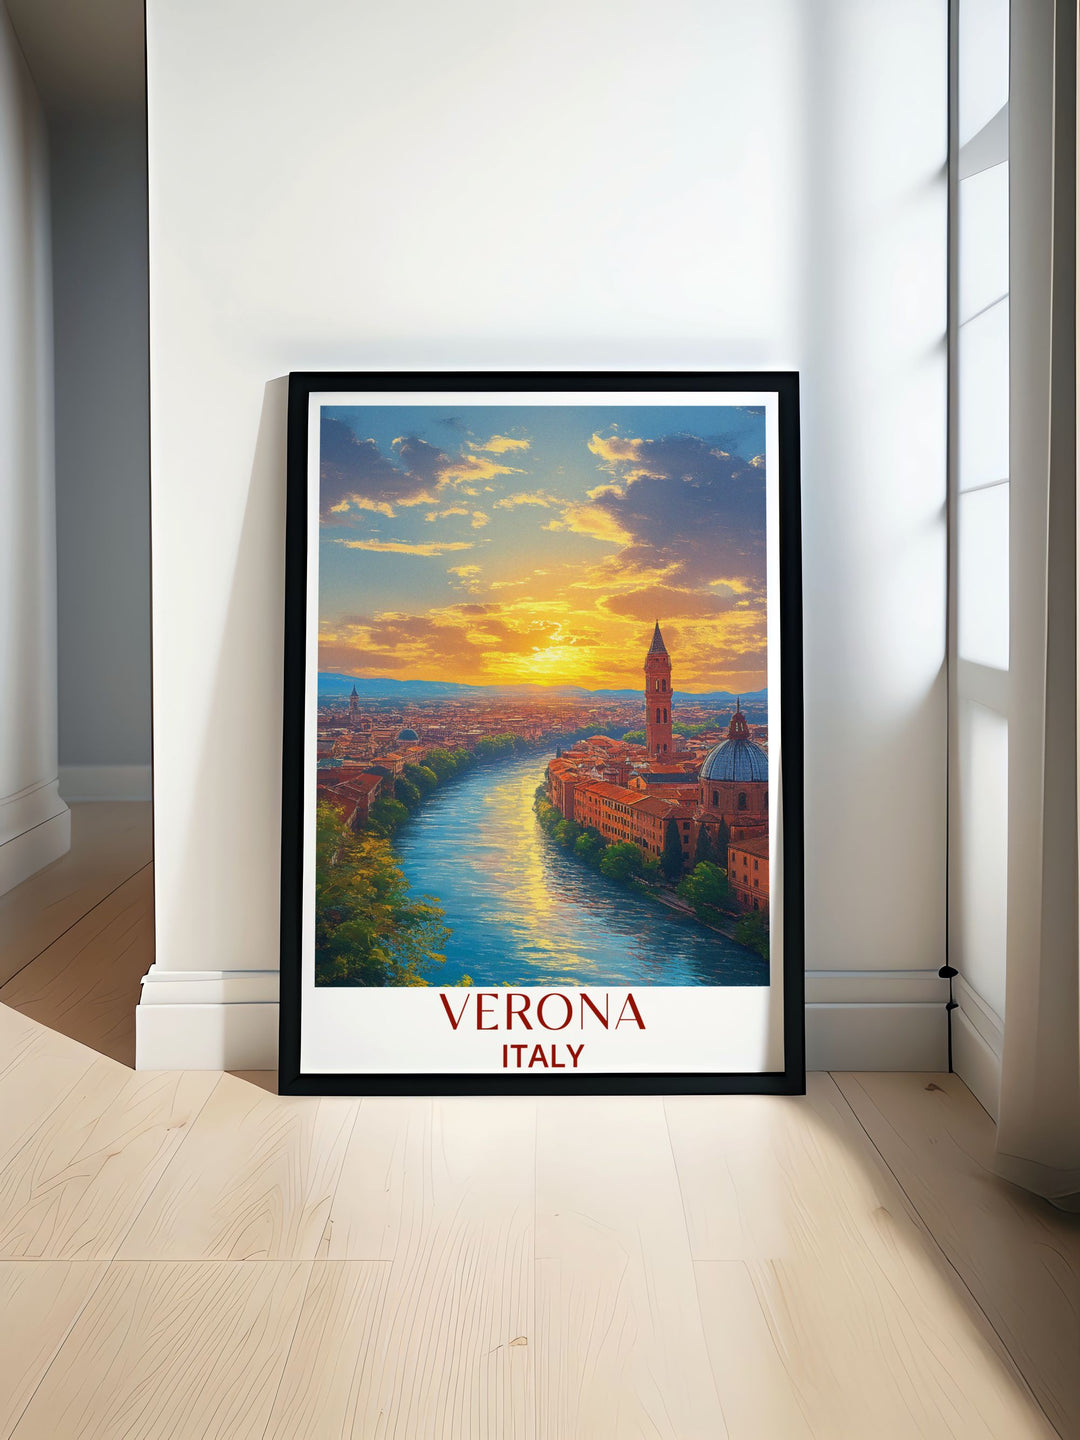 Scenic view of Castel San Pietro in Verona Italy captured in a stunning Italy travel print perfect for home decor or as a unique Verona gift showcasing the historic charm and beauty of Italian architecture and culture in a beautifully crafted wall art piece.